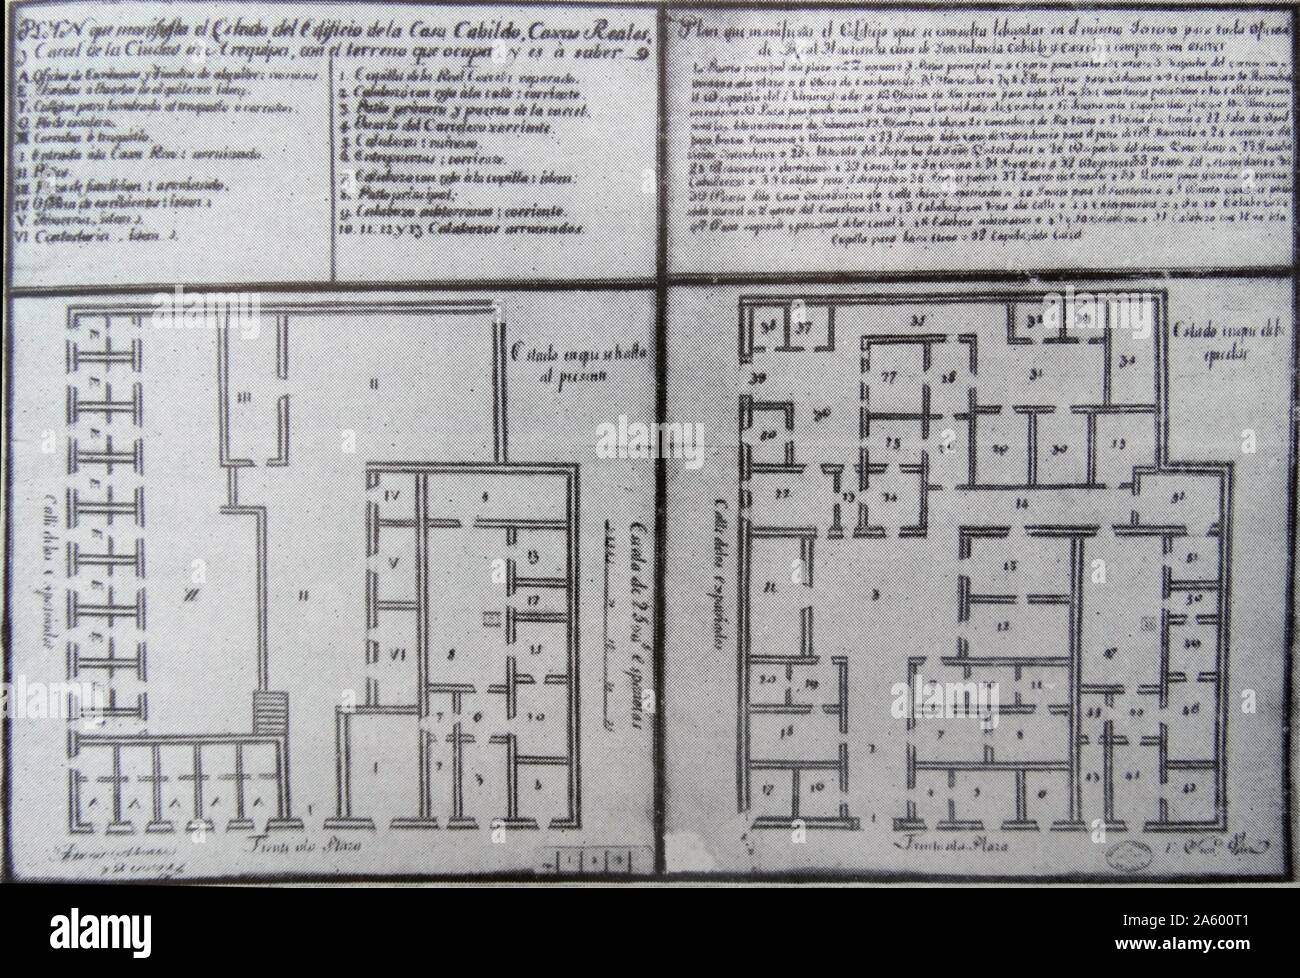 Plan of the Spanish Colonial governors residence in Arequipa, Peru 1754 Stock Photo